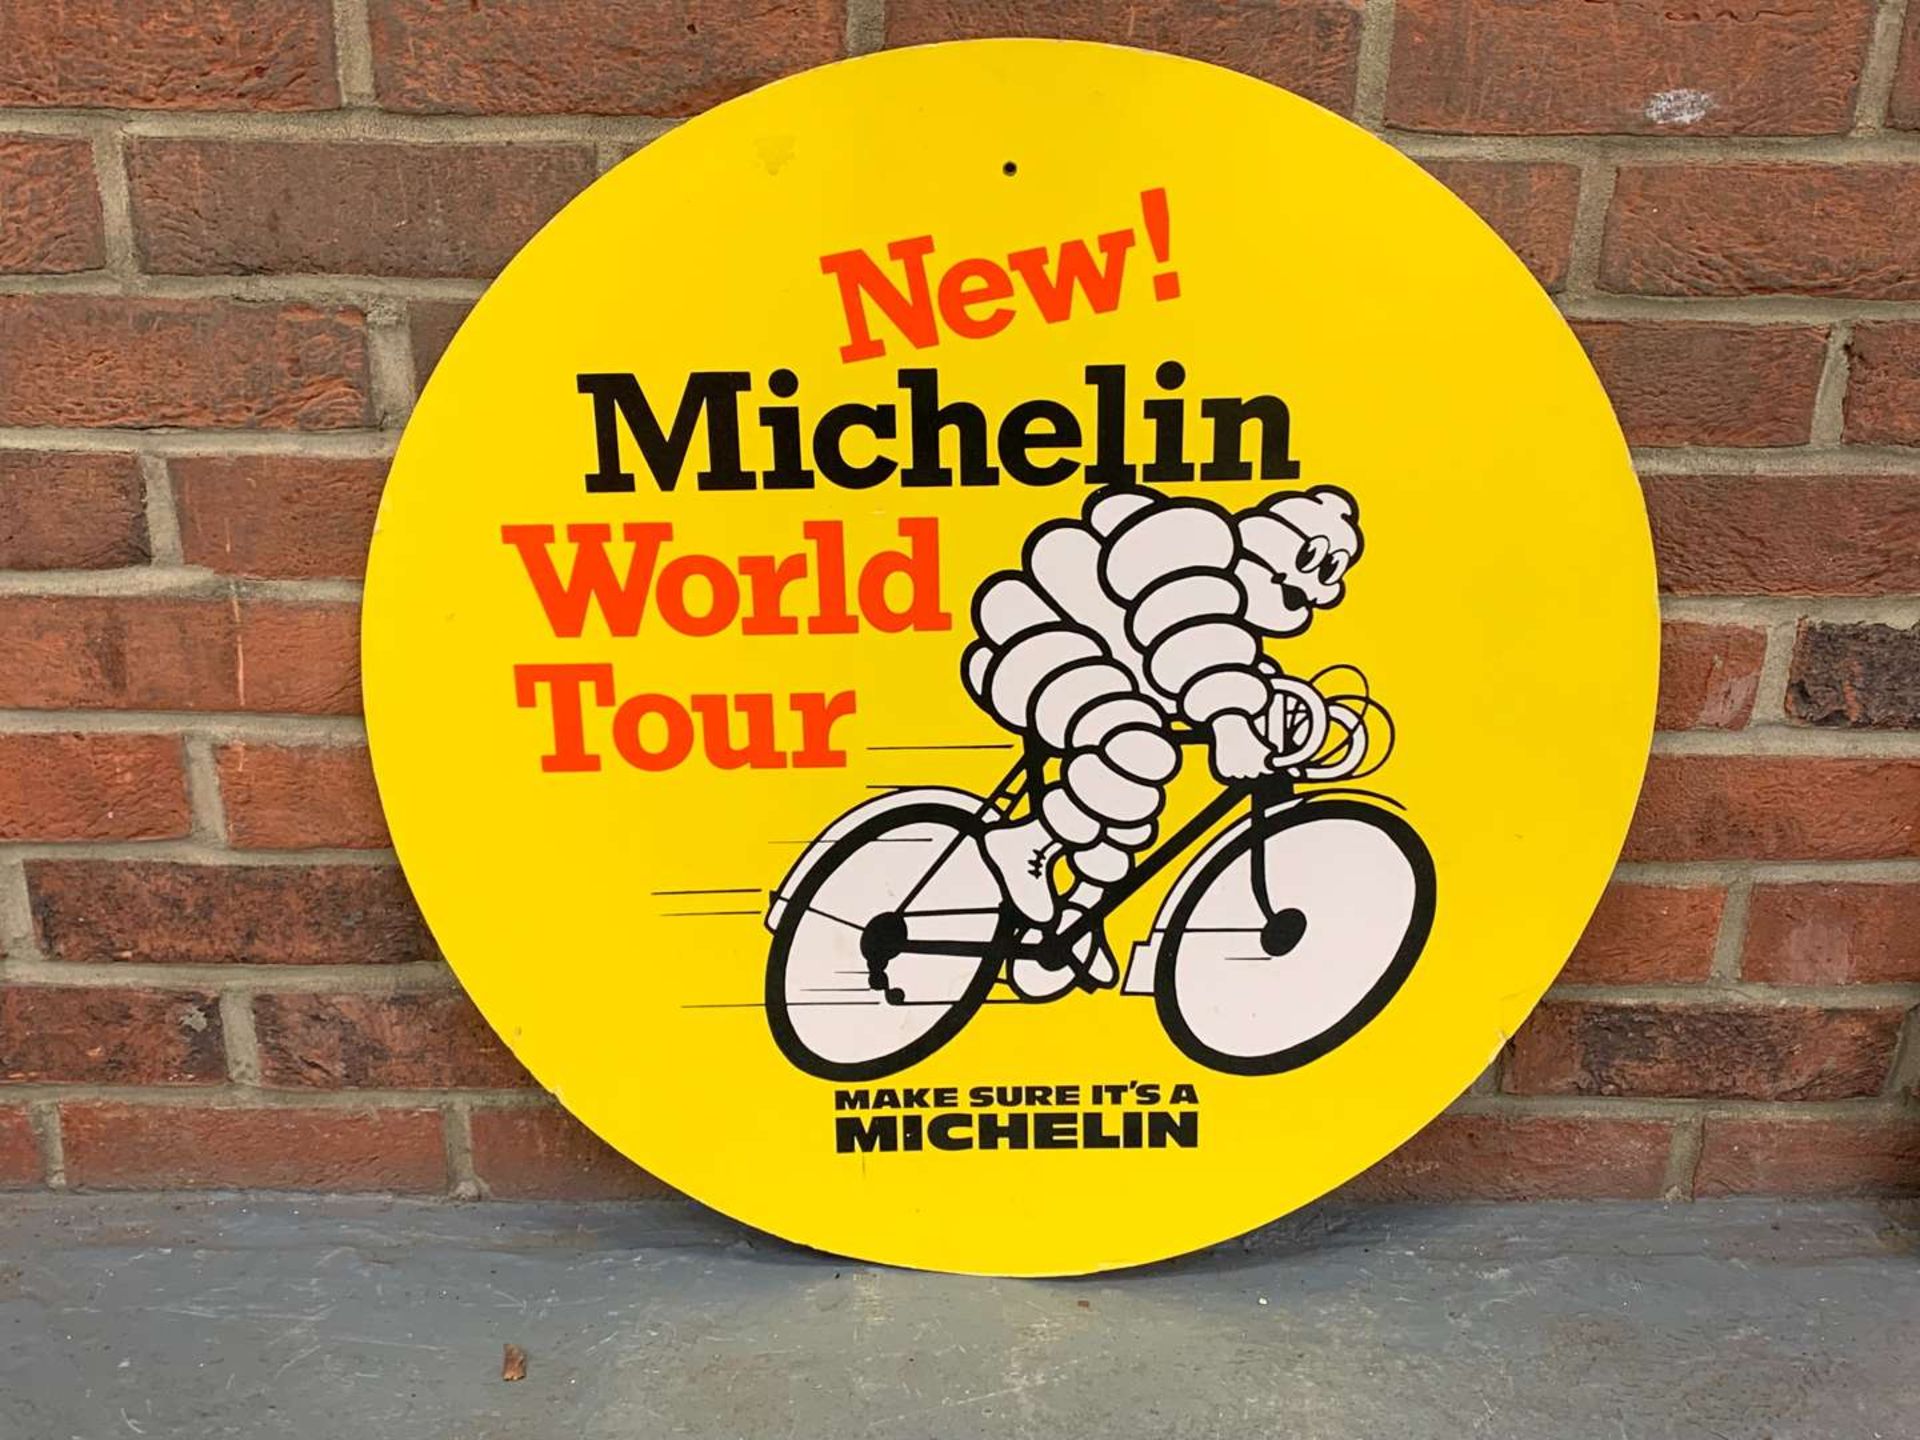 Michelin Cycle Tyre's Circular Cardboard Sign - Image 2 of 2